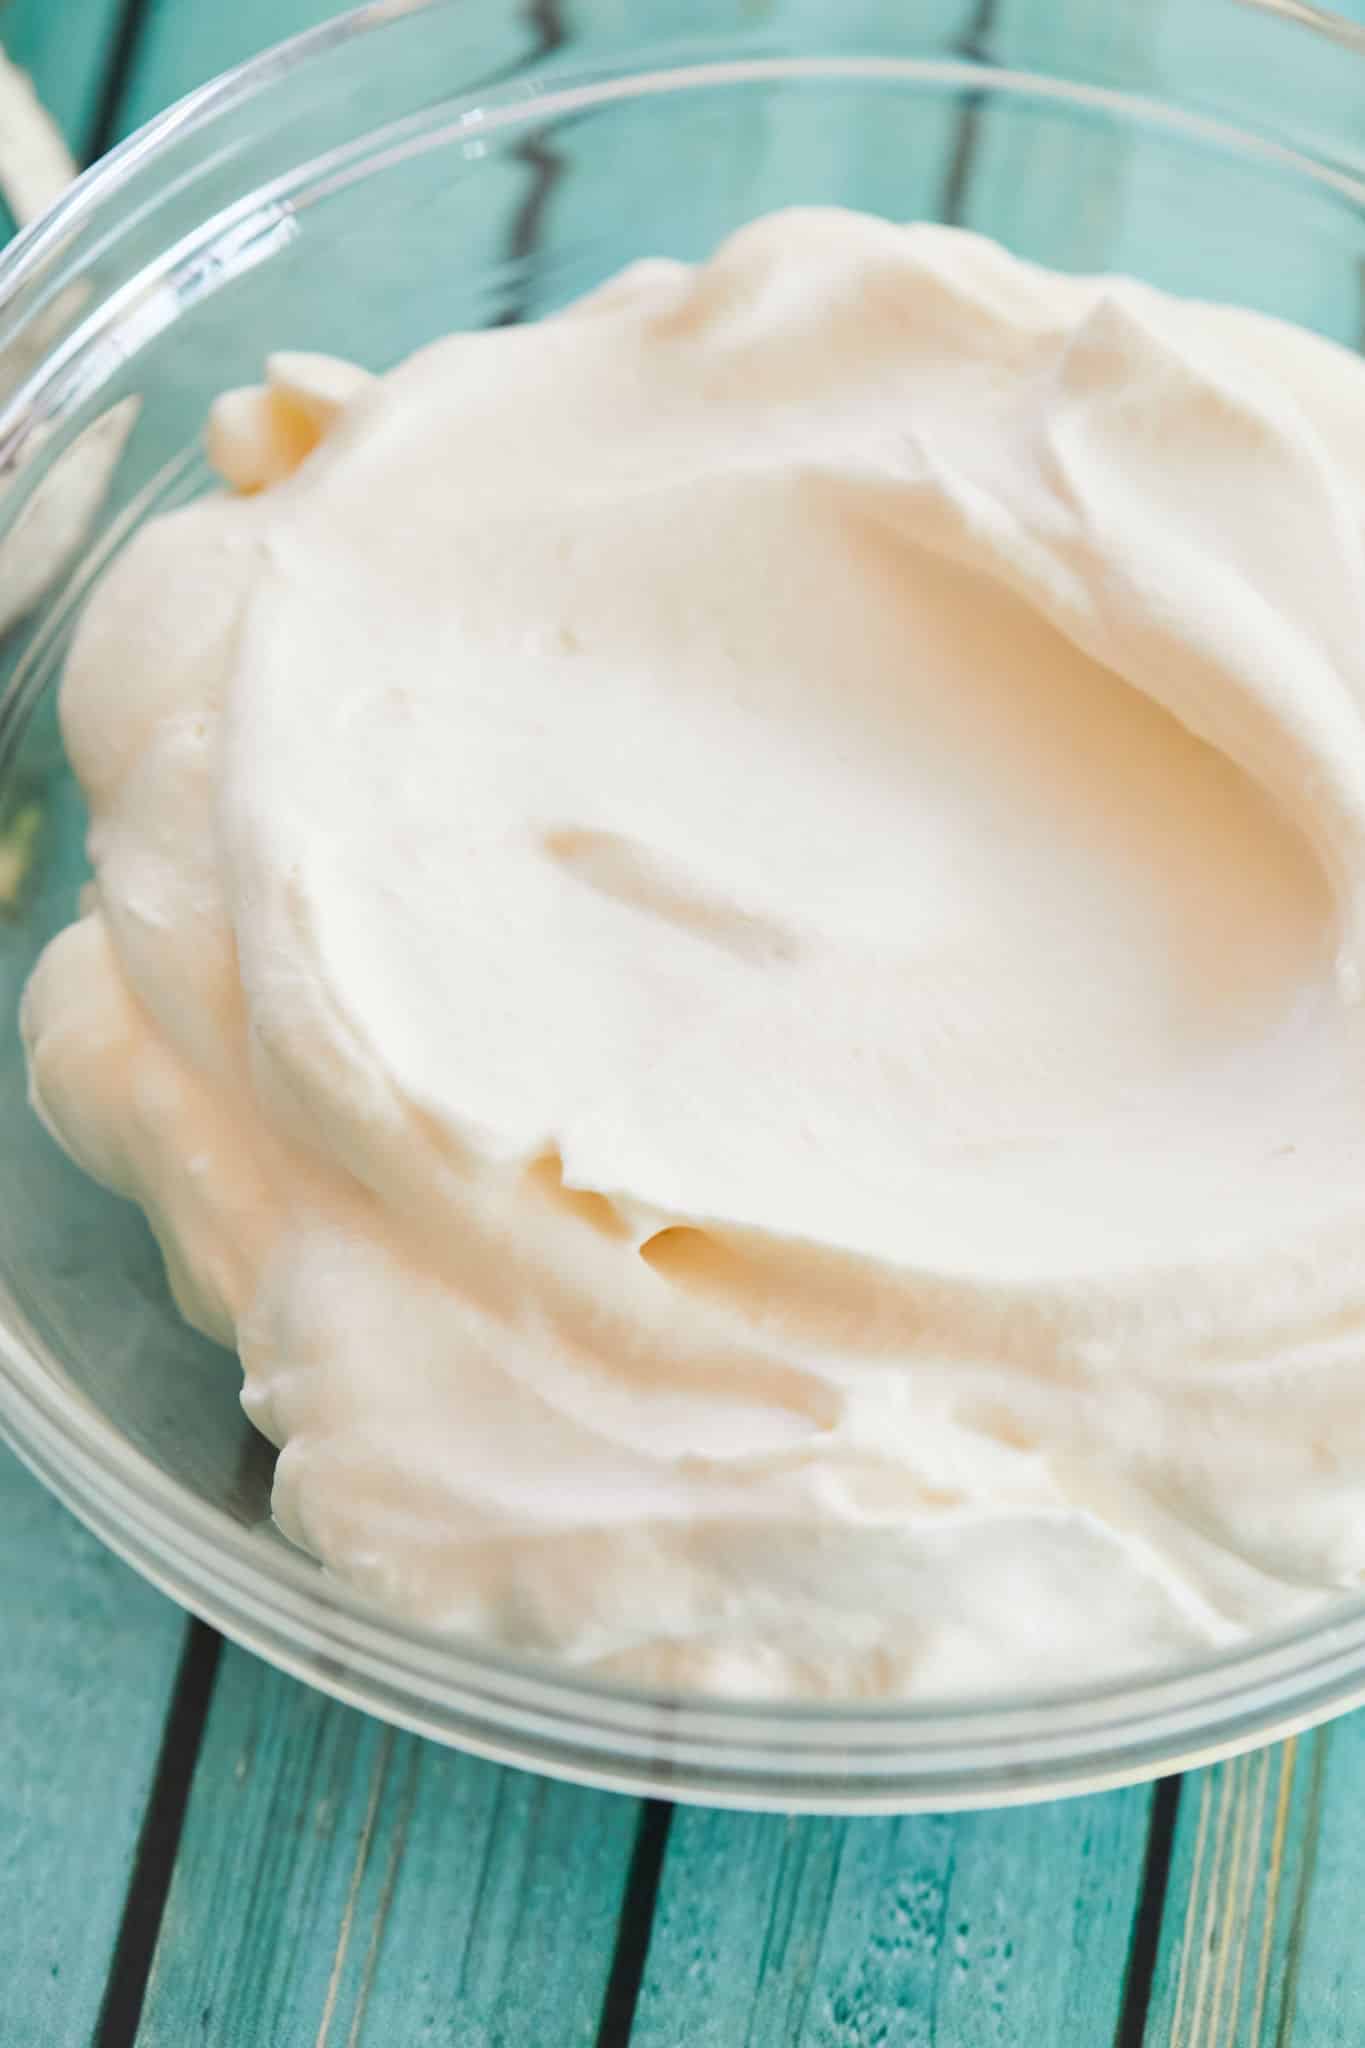 Creamy, white stabilized whipped cream sits in a clear bowl.